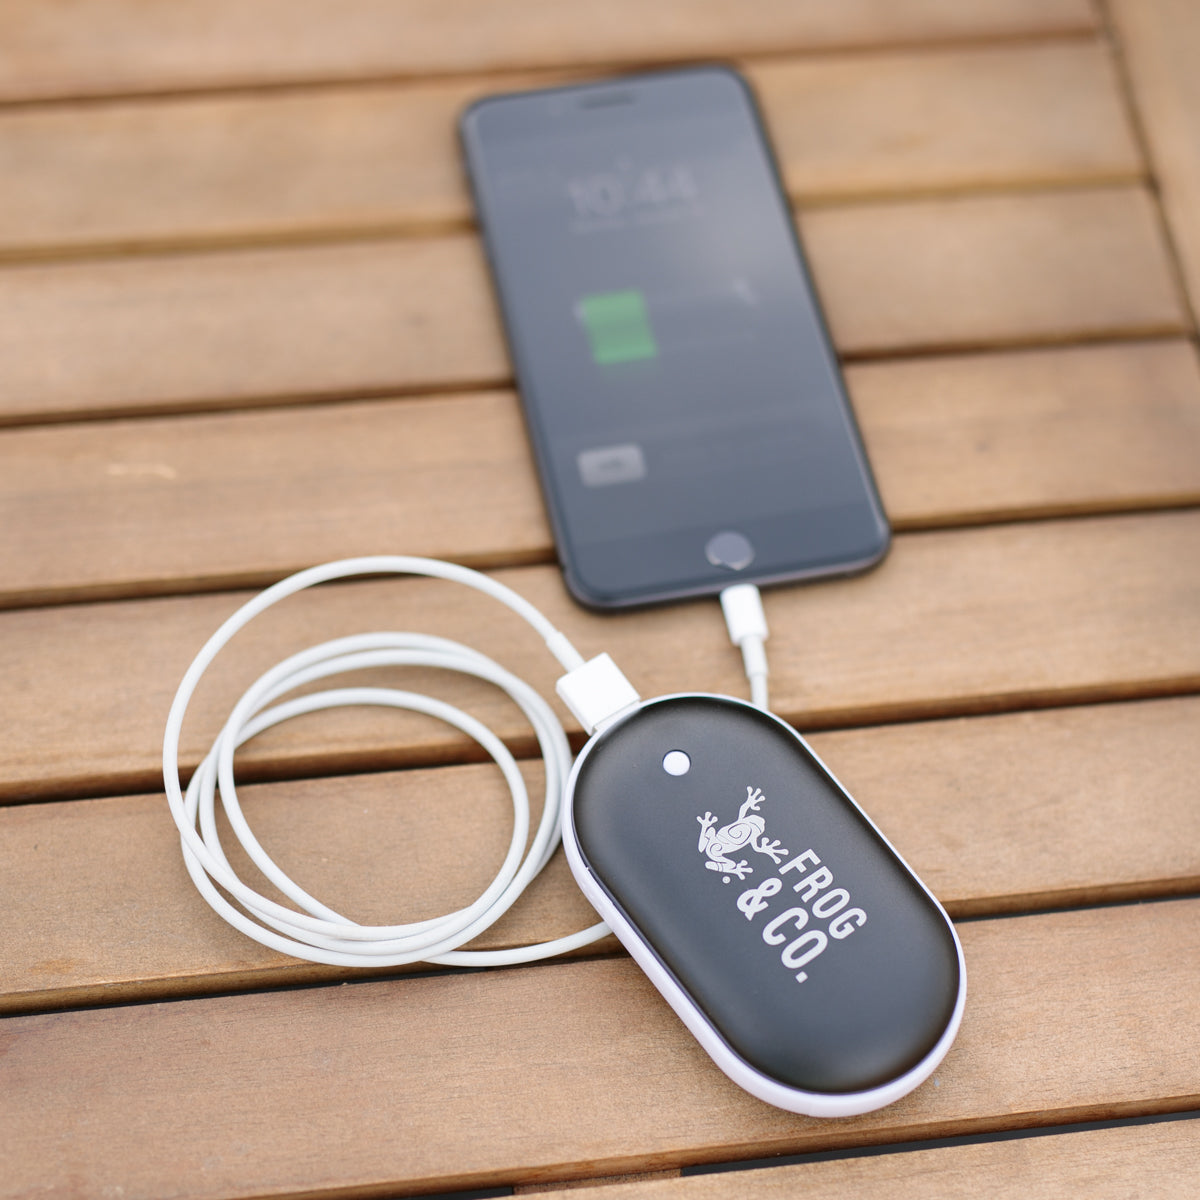 Electric Hand Warmer charging cell phone on table